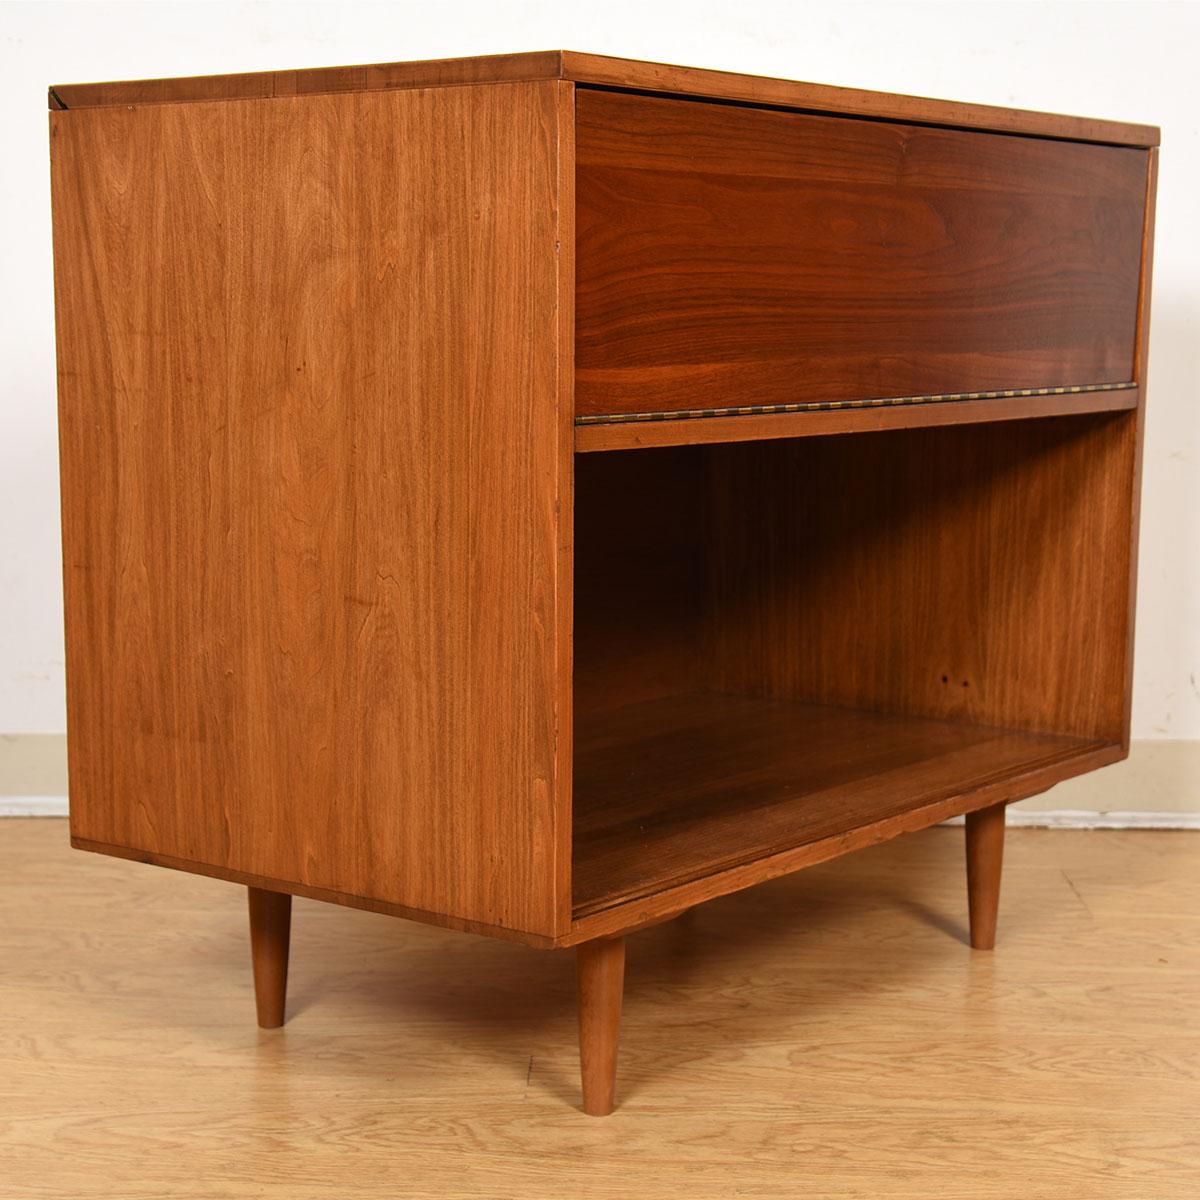 MCM Walnut Flip-Down Front Media Cabinet with Flip-Up Top

Additional Information:
Material: Walnut
Featured at Kensington:
Wonderful, space saving media cabinet has space for your components and vinyl collection.
Components are kept dust-free